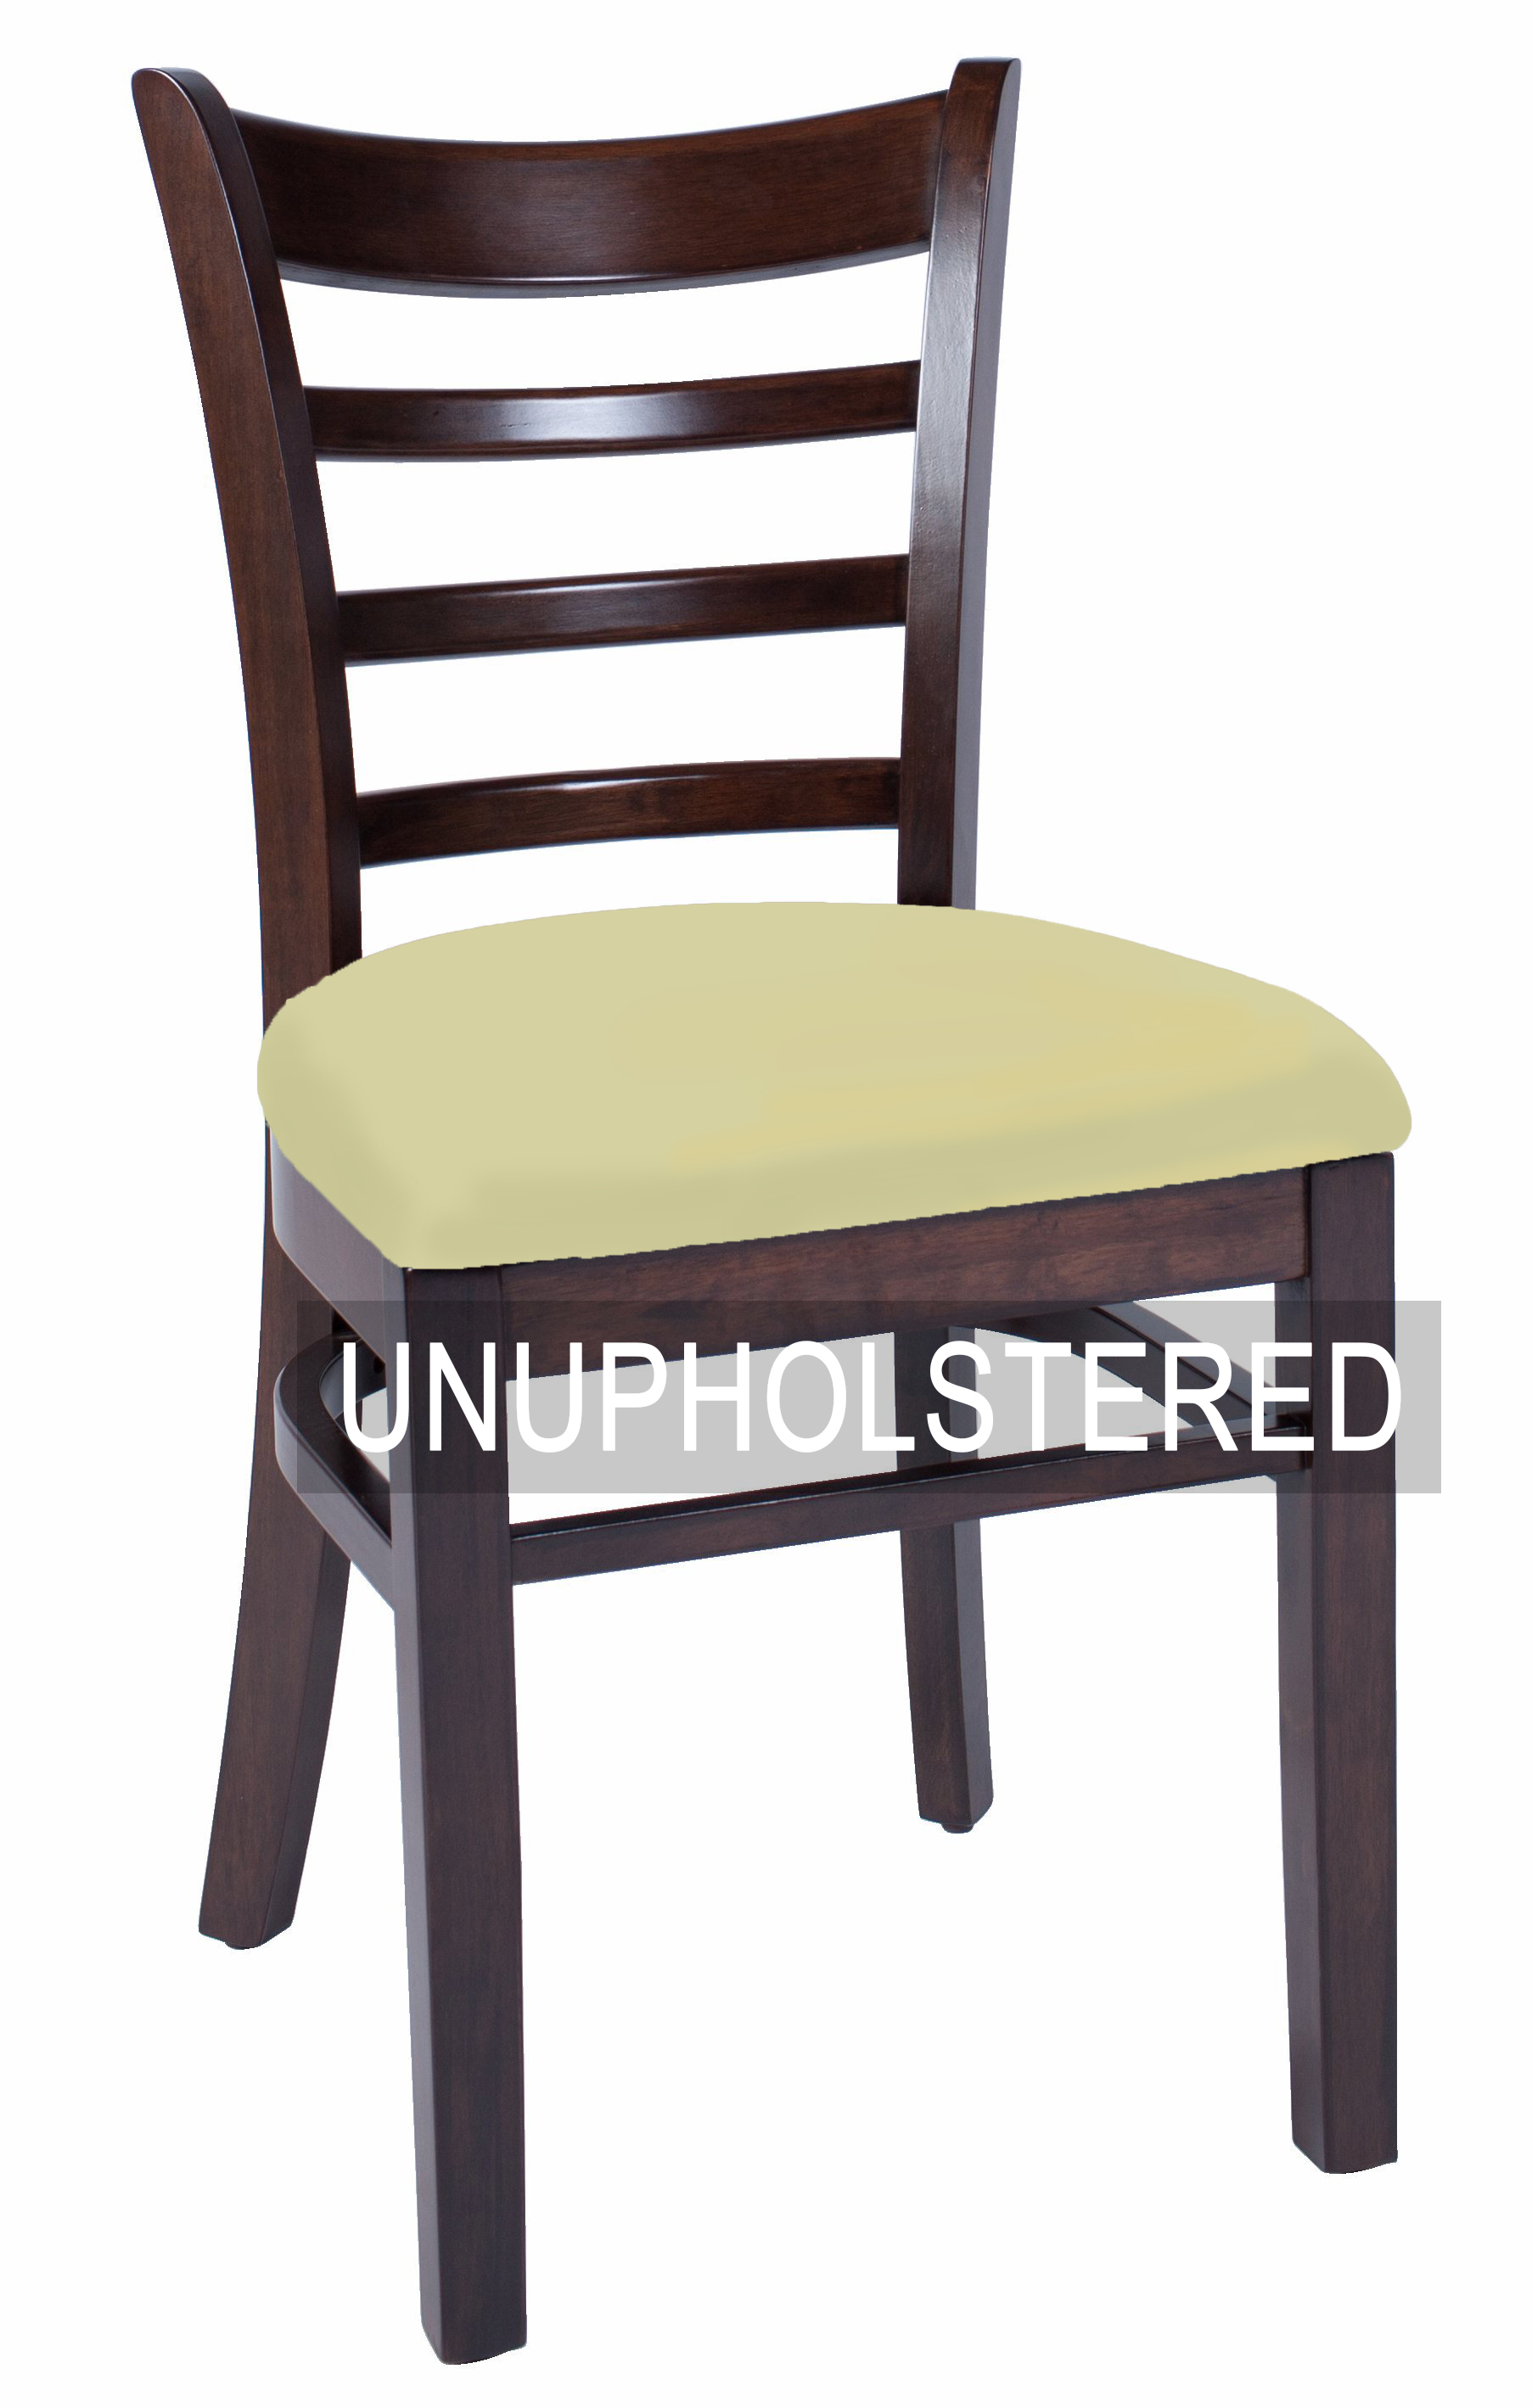 CHAIR MUSTANG WALNUT + UNUPHOLSTERED